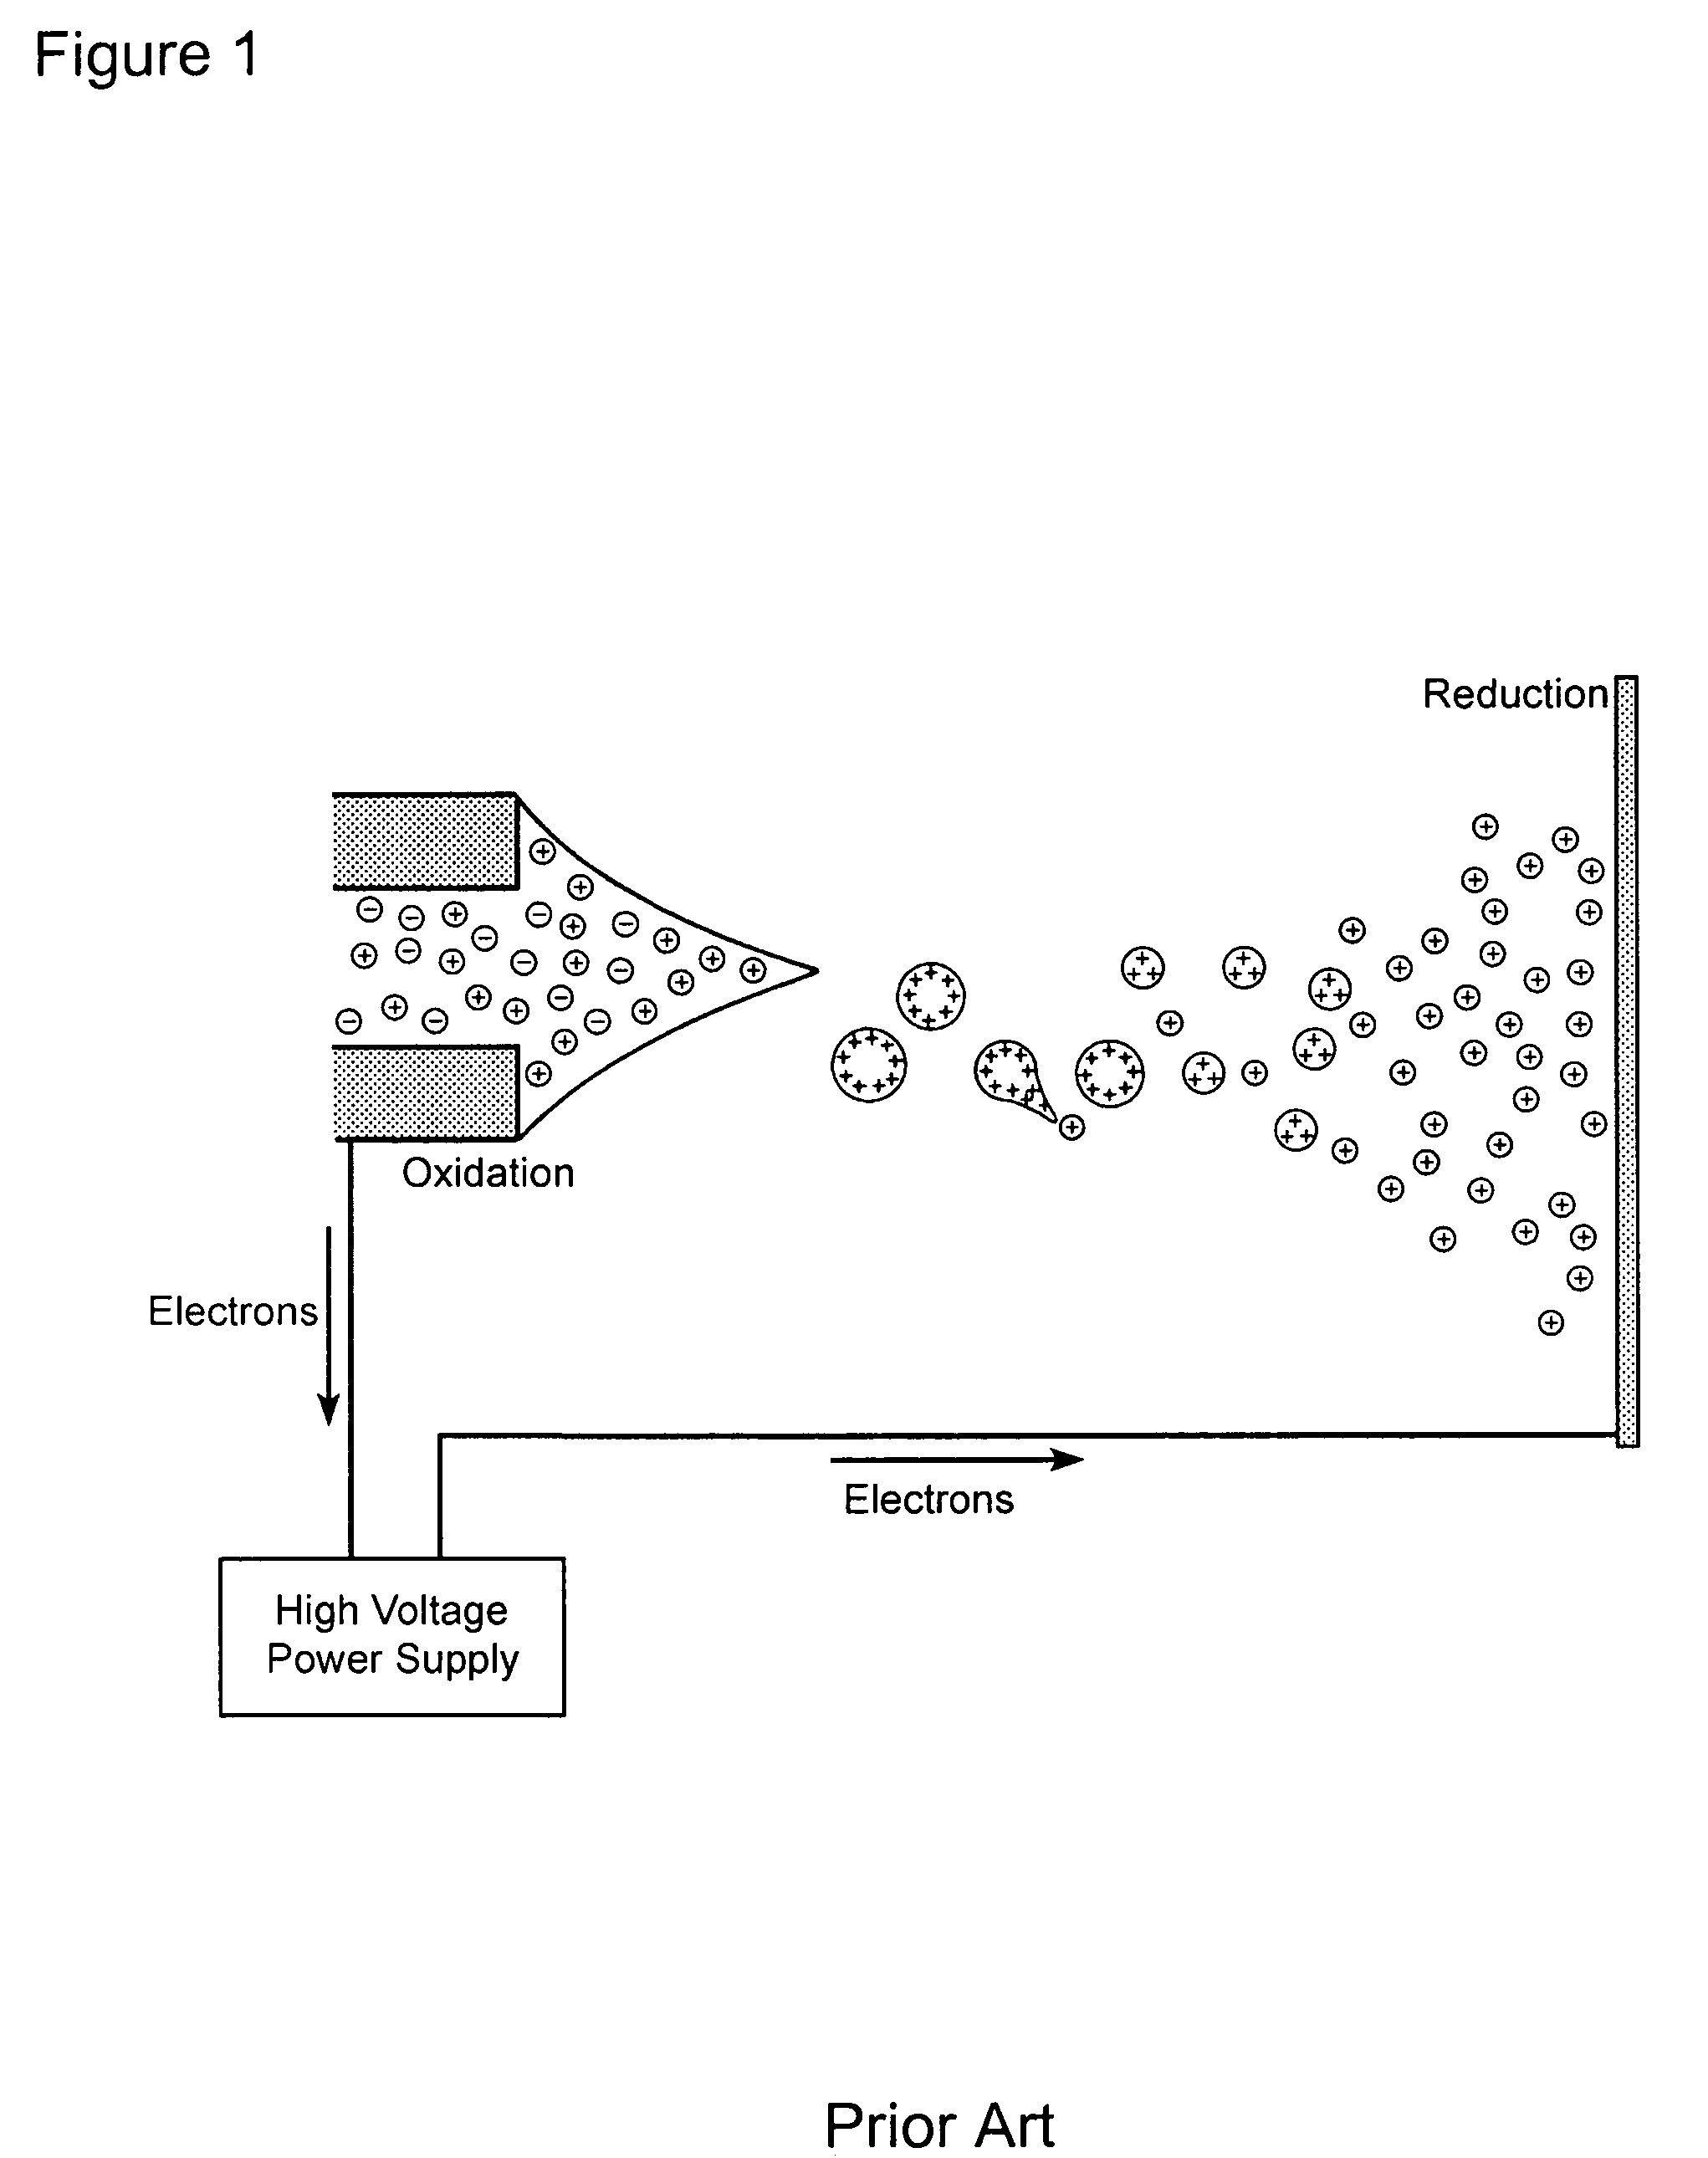 Chemical probe using field-induced droplet ionization mass spectrometry